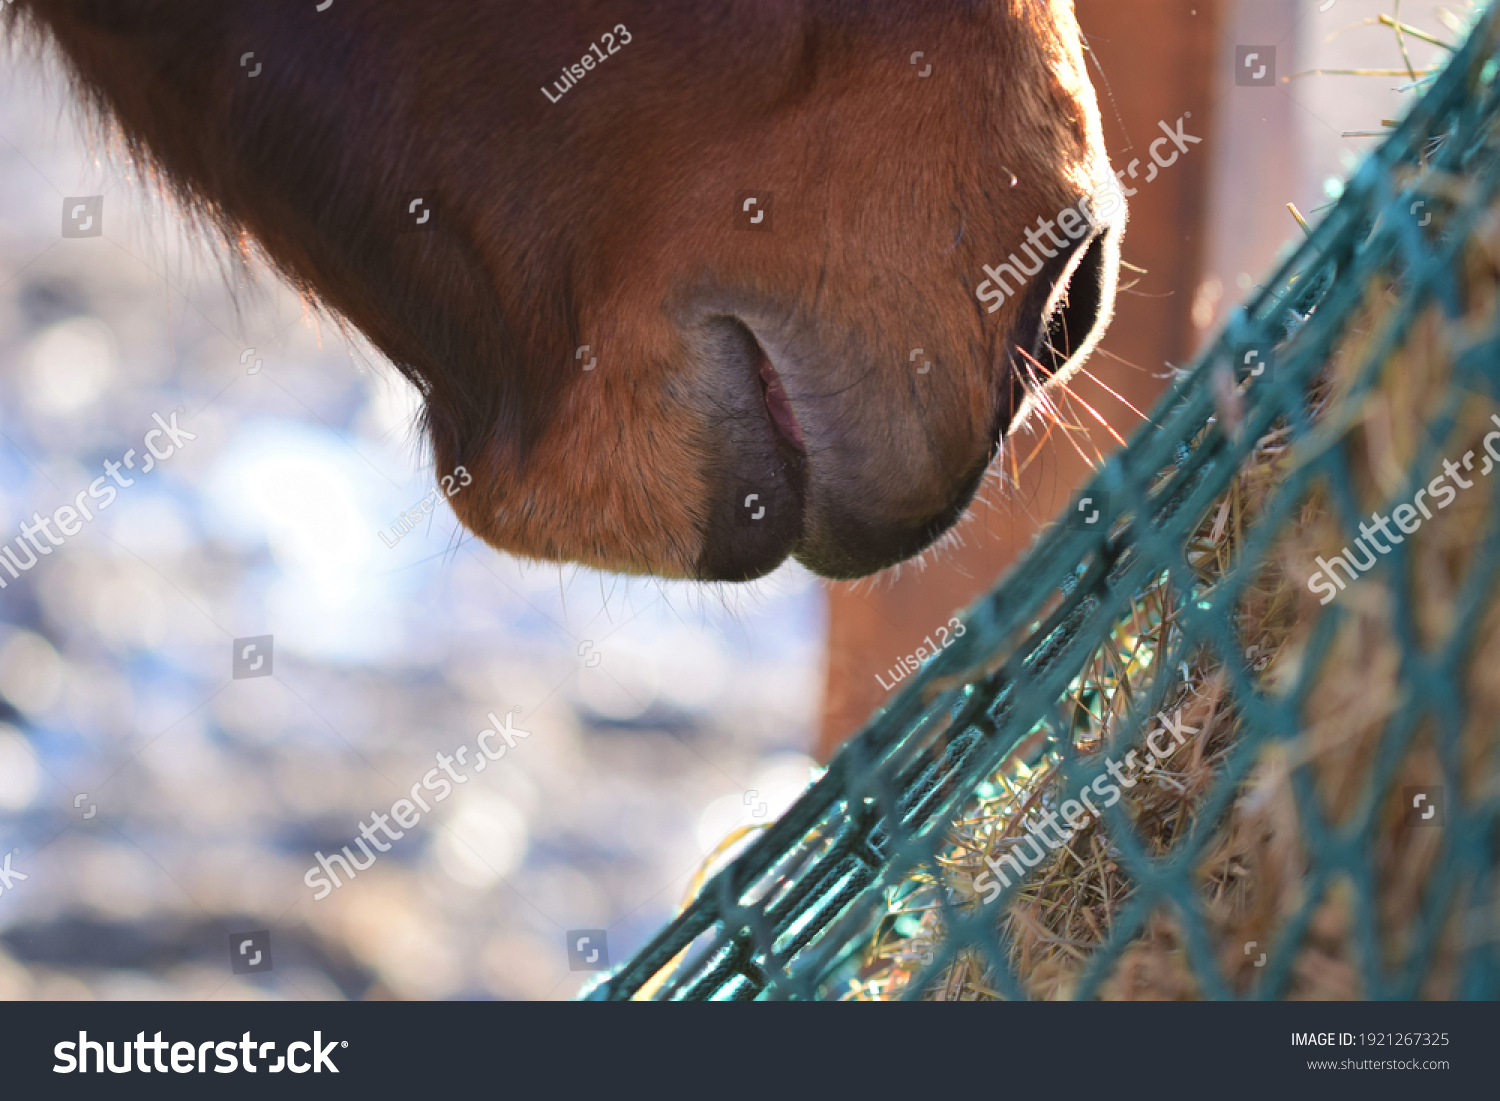 Close up the mouth of a brown horse near hay under a green hay net #1921267325